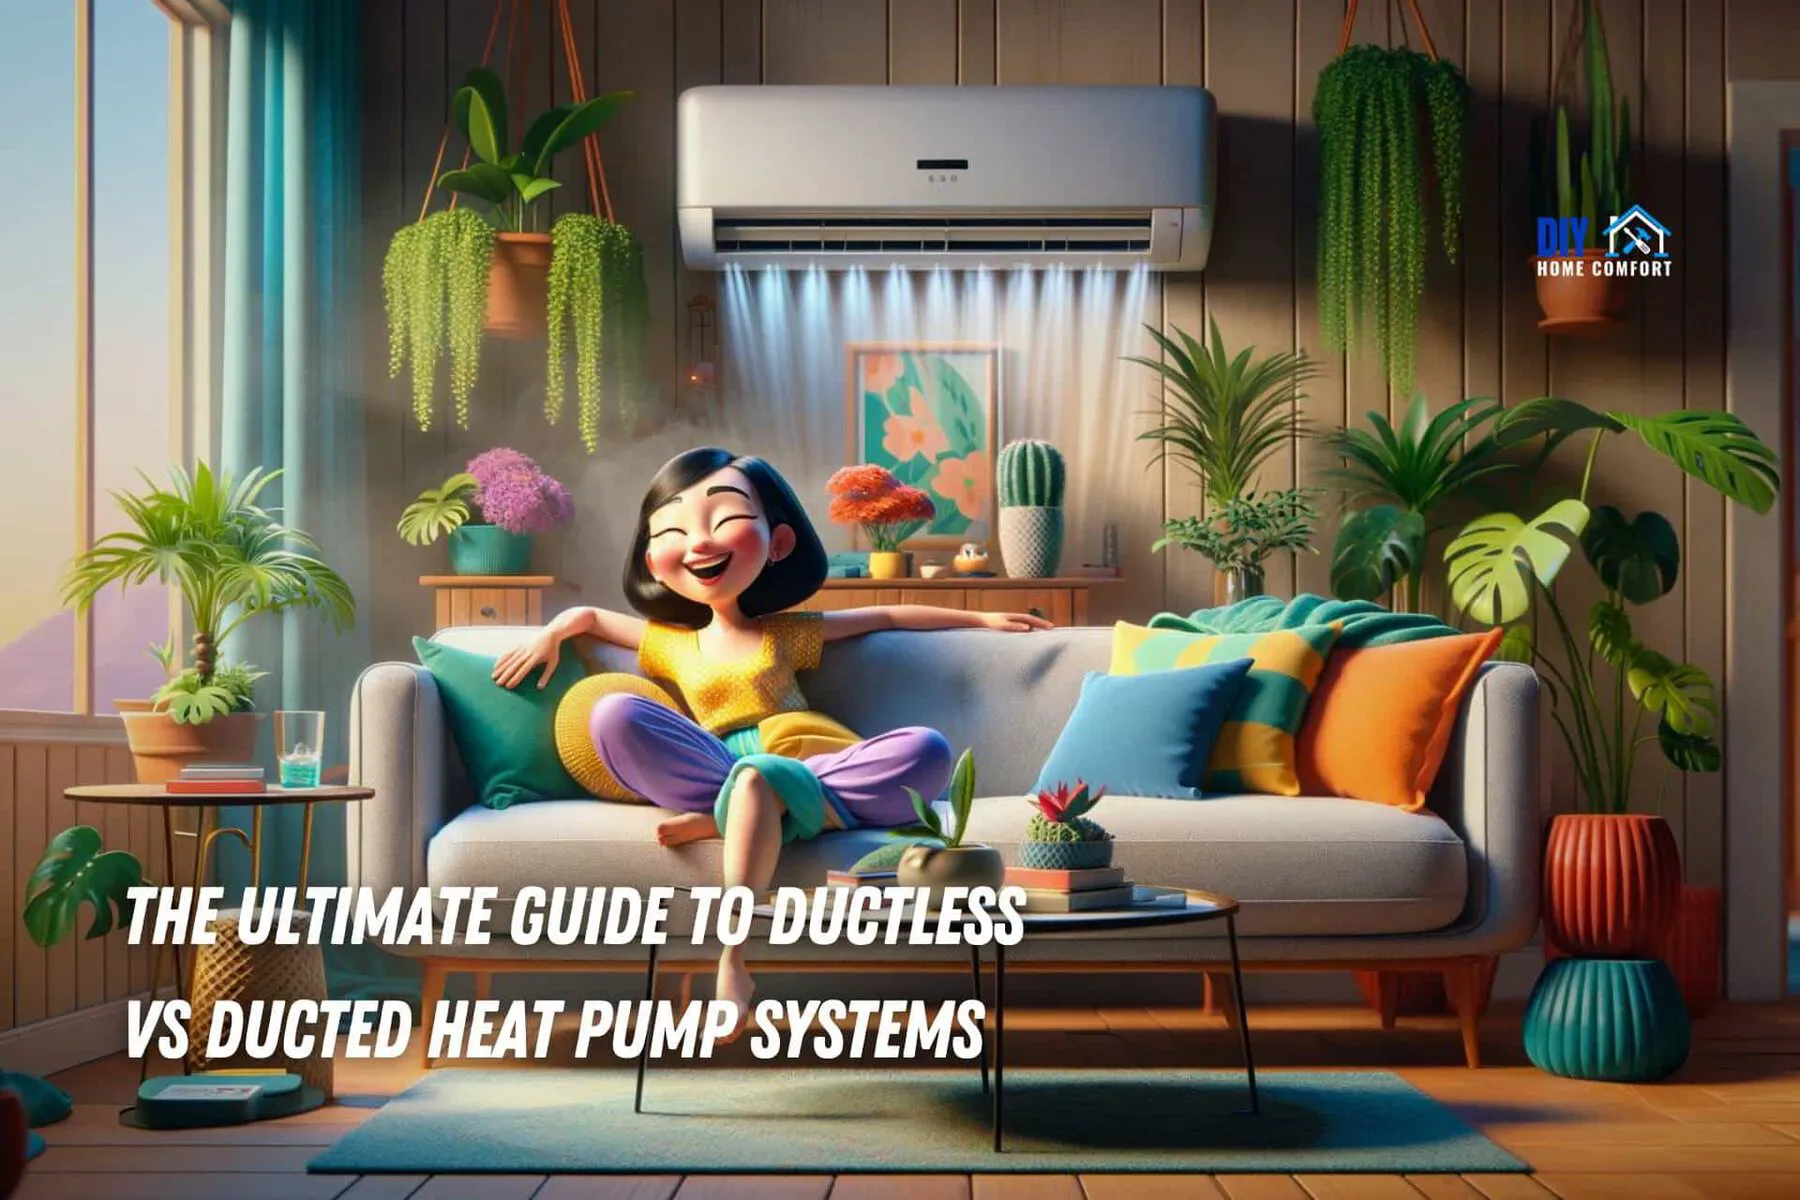 The Ultimate Guide to Ductless vs Ducted Heat Pump Systems | DIY Home Comfort